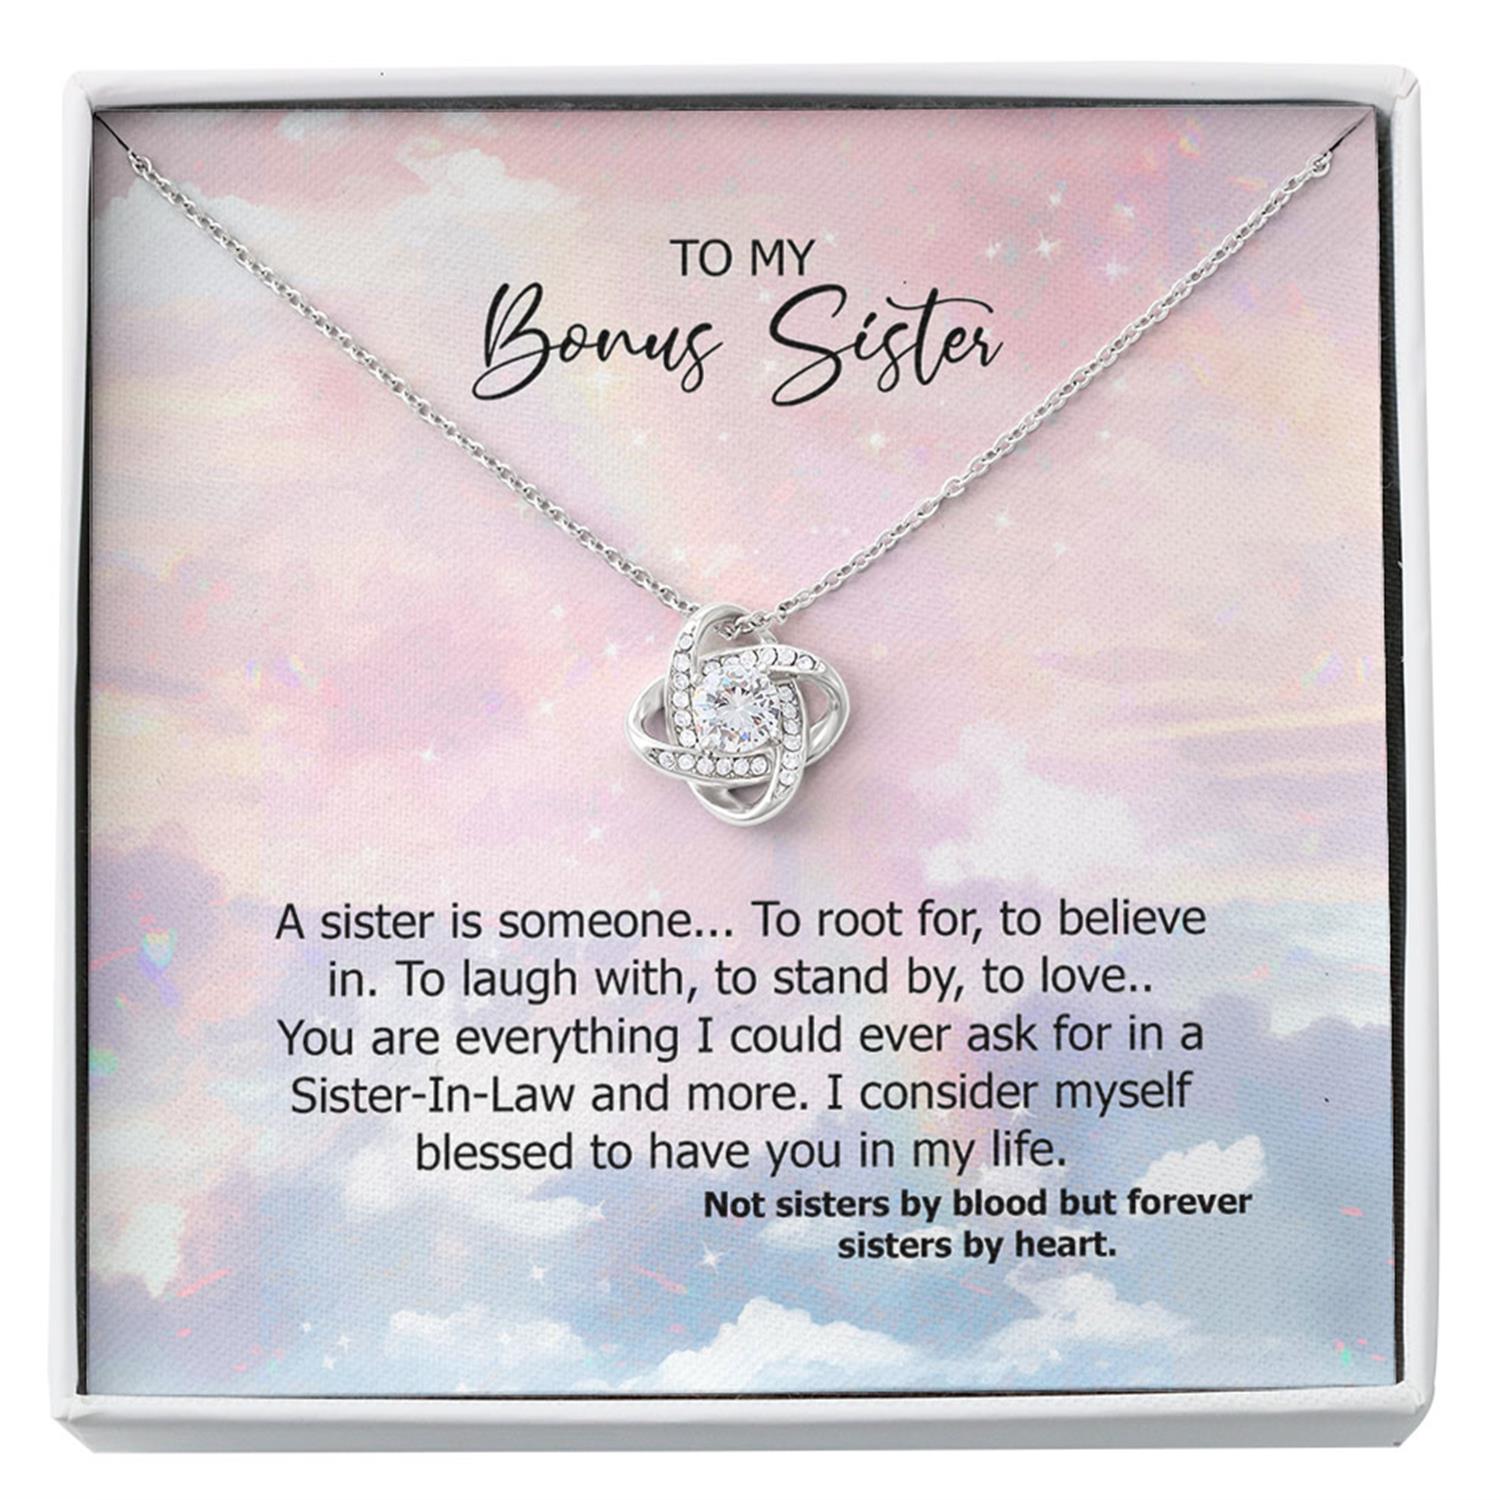 Sister Necklace, Sister In Law Necklace, Christmas Necklace For Sister In Law, Gift For Unbiological Sister, Bonus Sister Gift, Gift For Sister In Law Custom Necklace